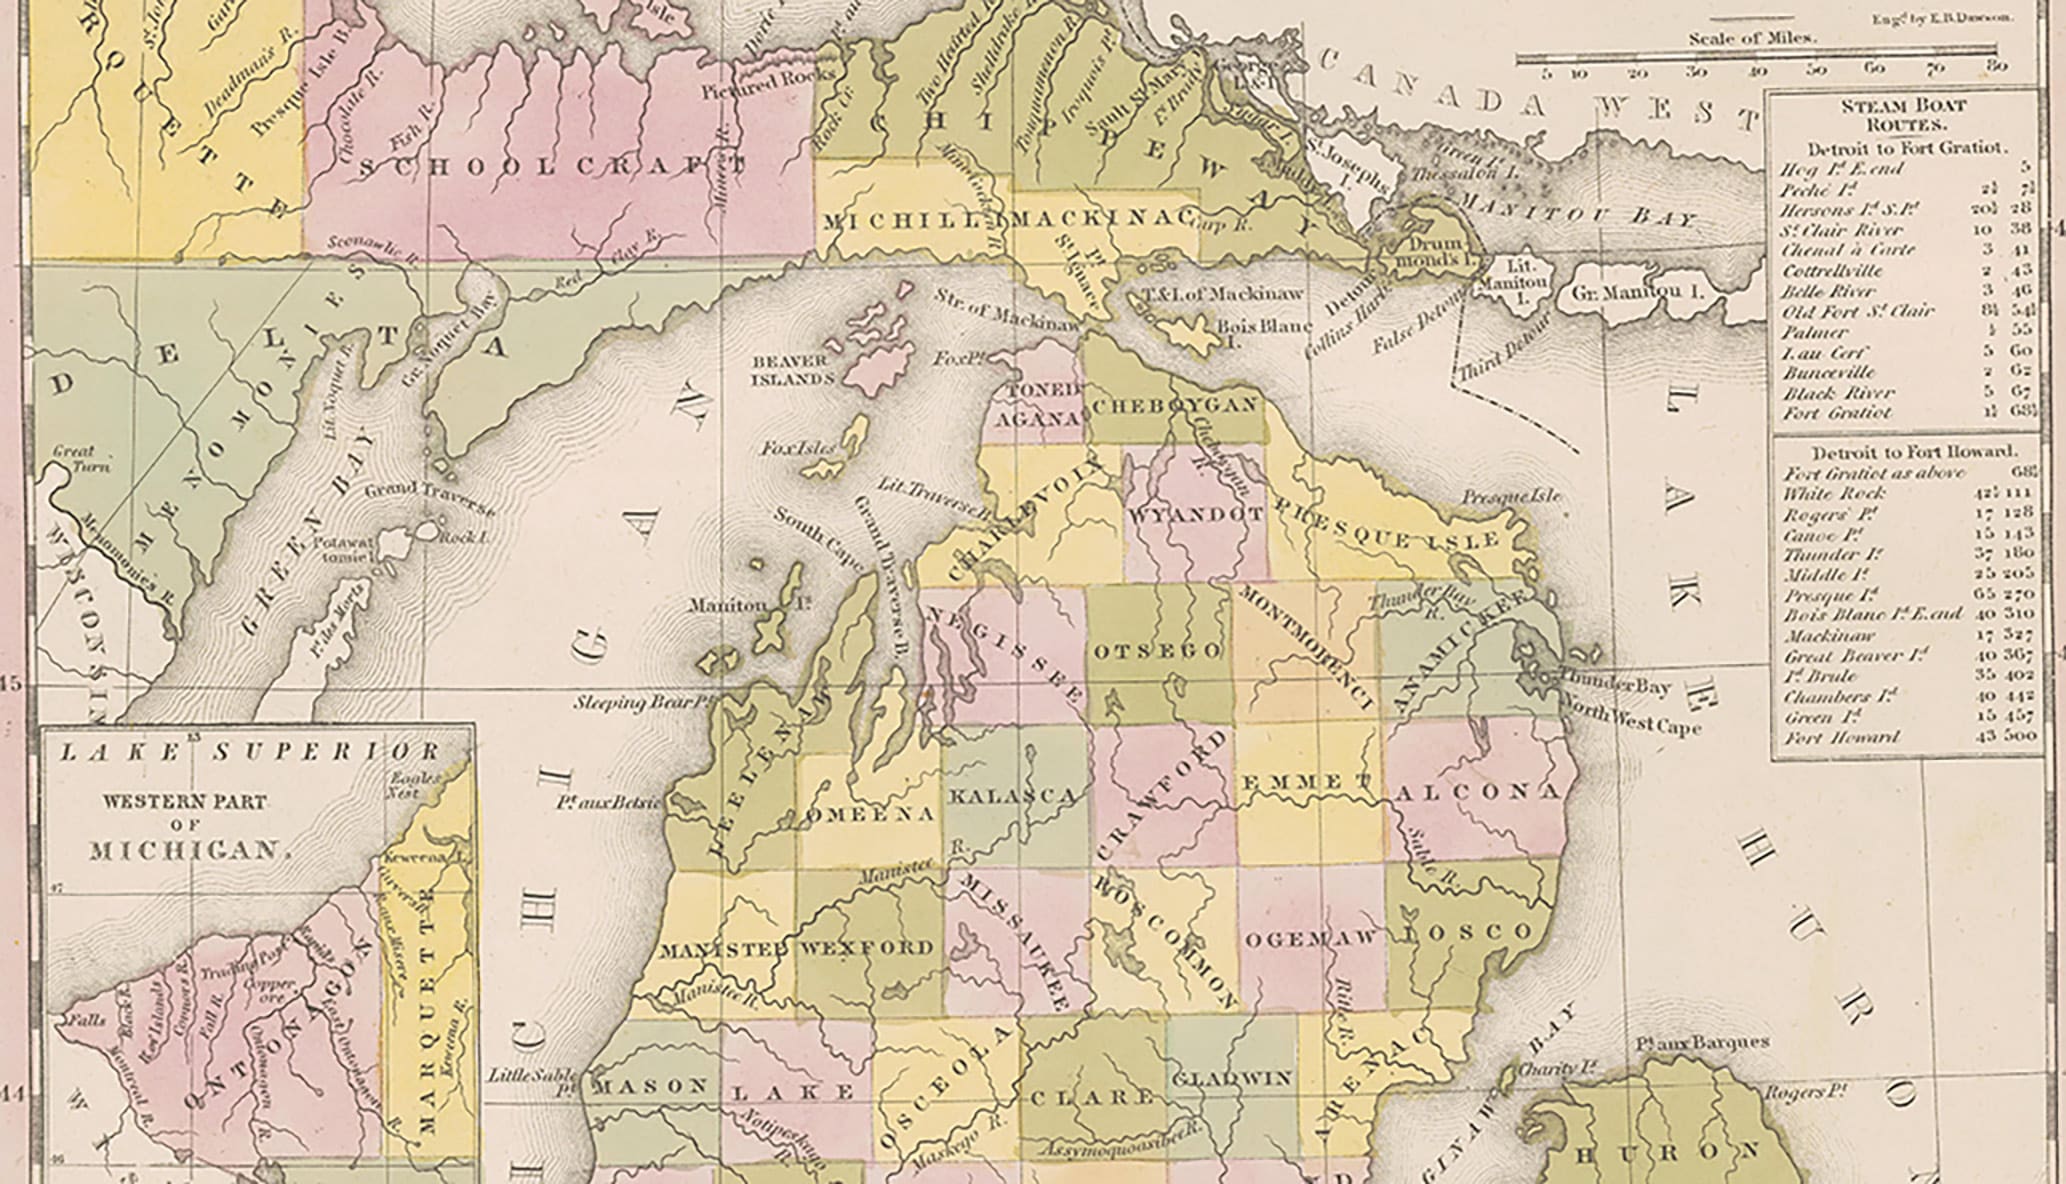 A new map of Michigan with its canals, roads & distances, 1841